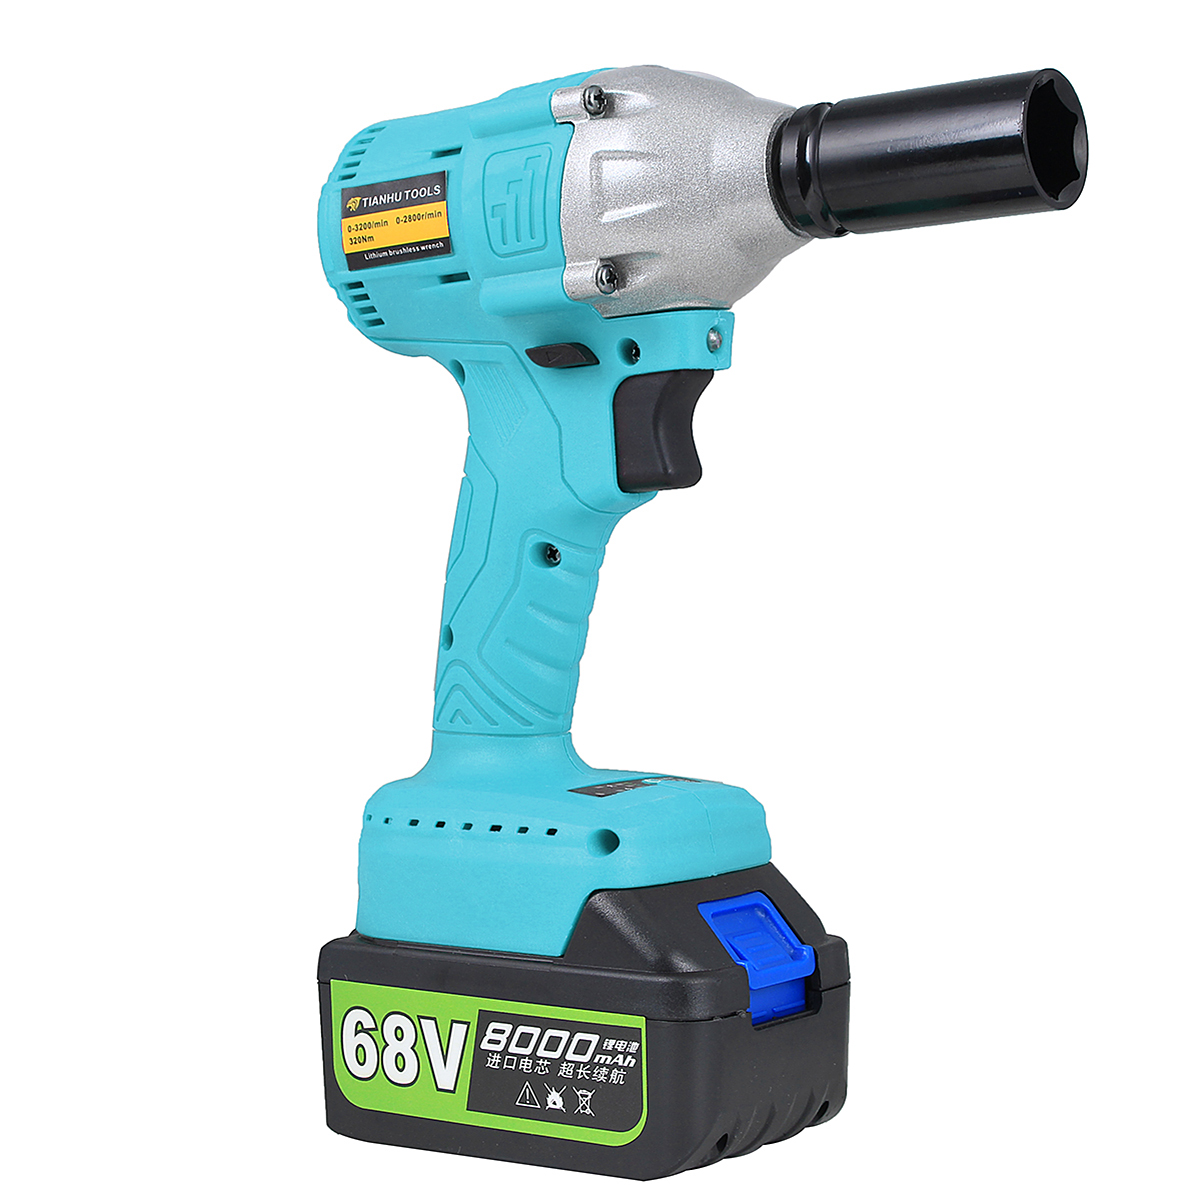 8000mAh-68V-Lithium-Ion-Brushless-Cordless-High-Torque-Square-Drive-Impact-Wrench-1262426-4